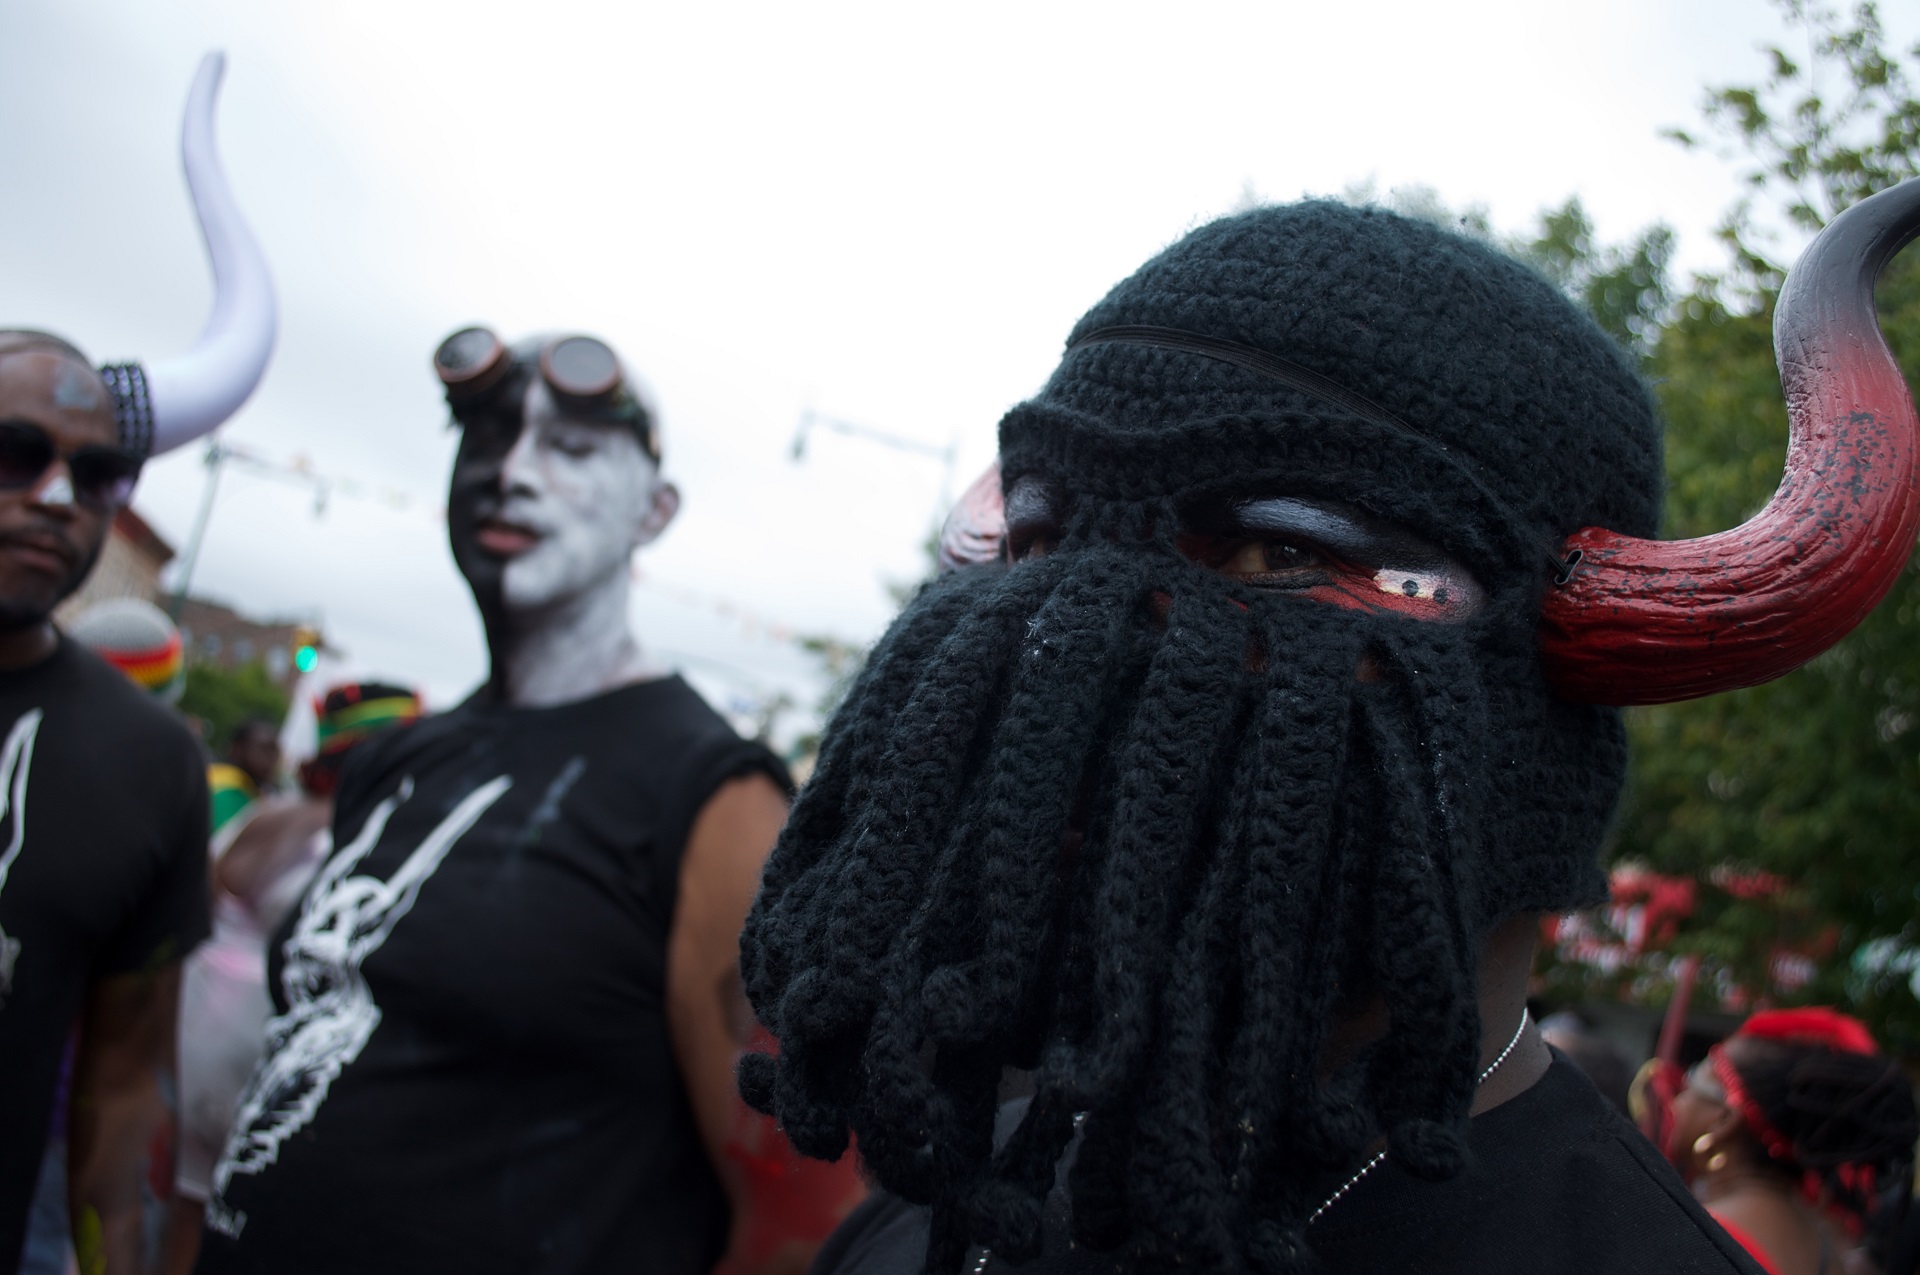 A reveler wearing a knit hat with demon horns poses for the camera.